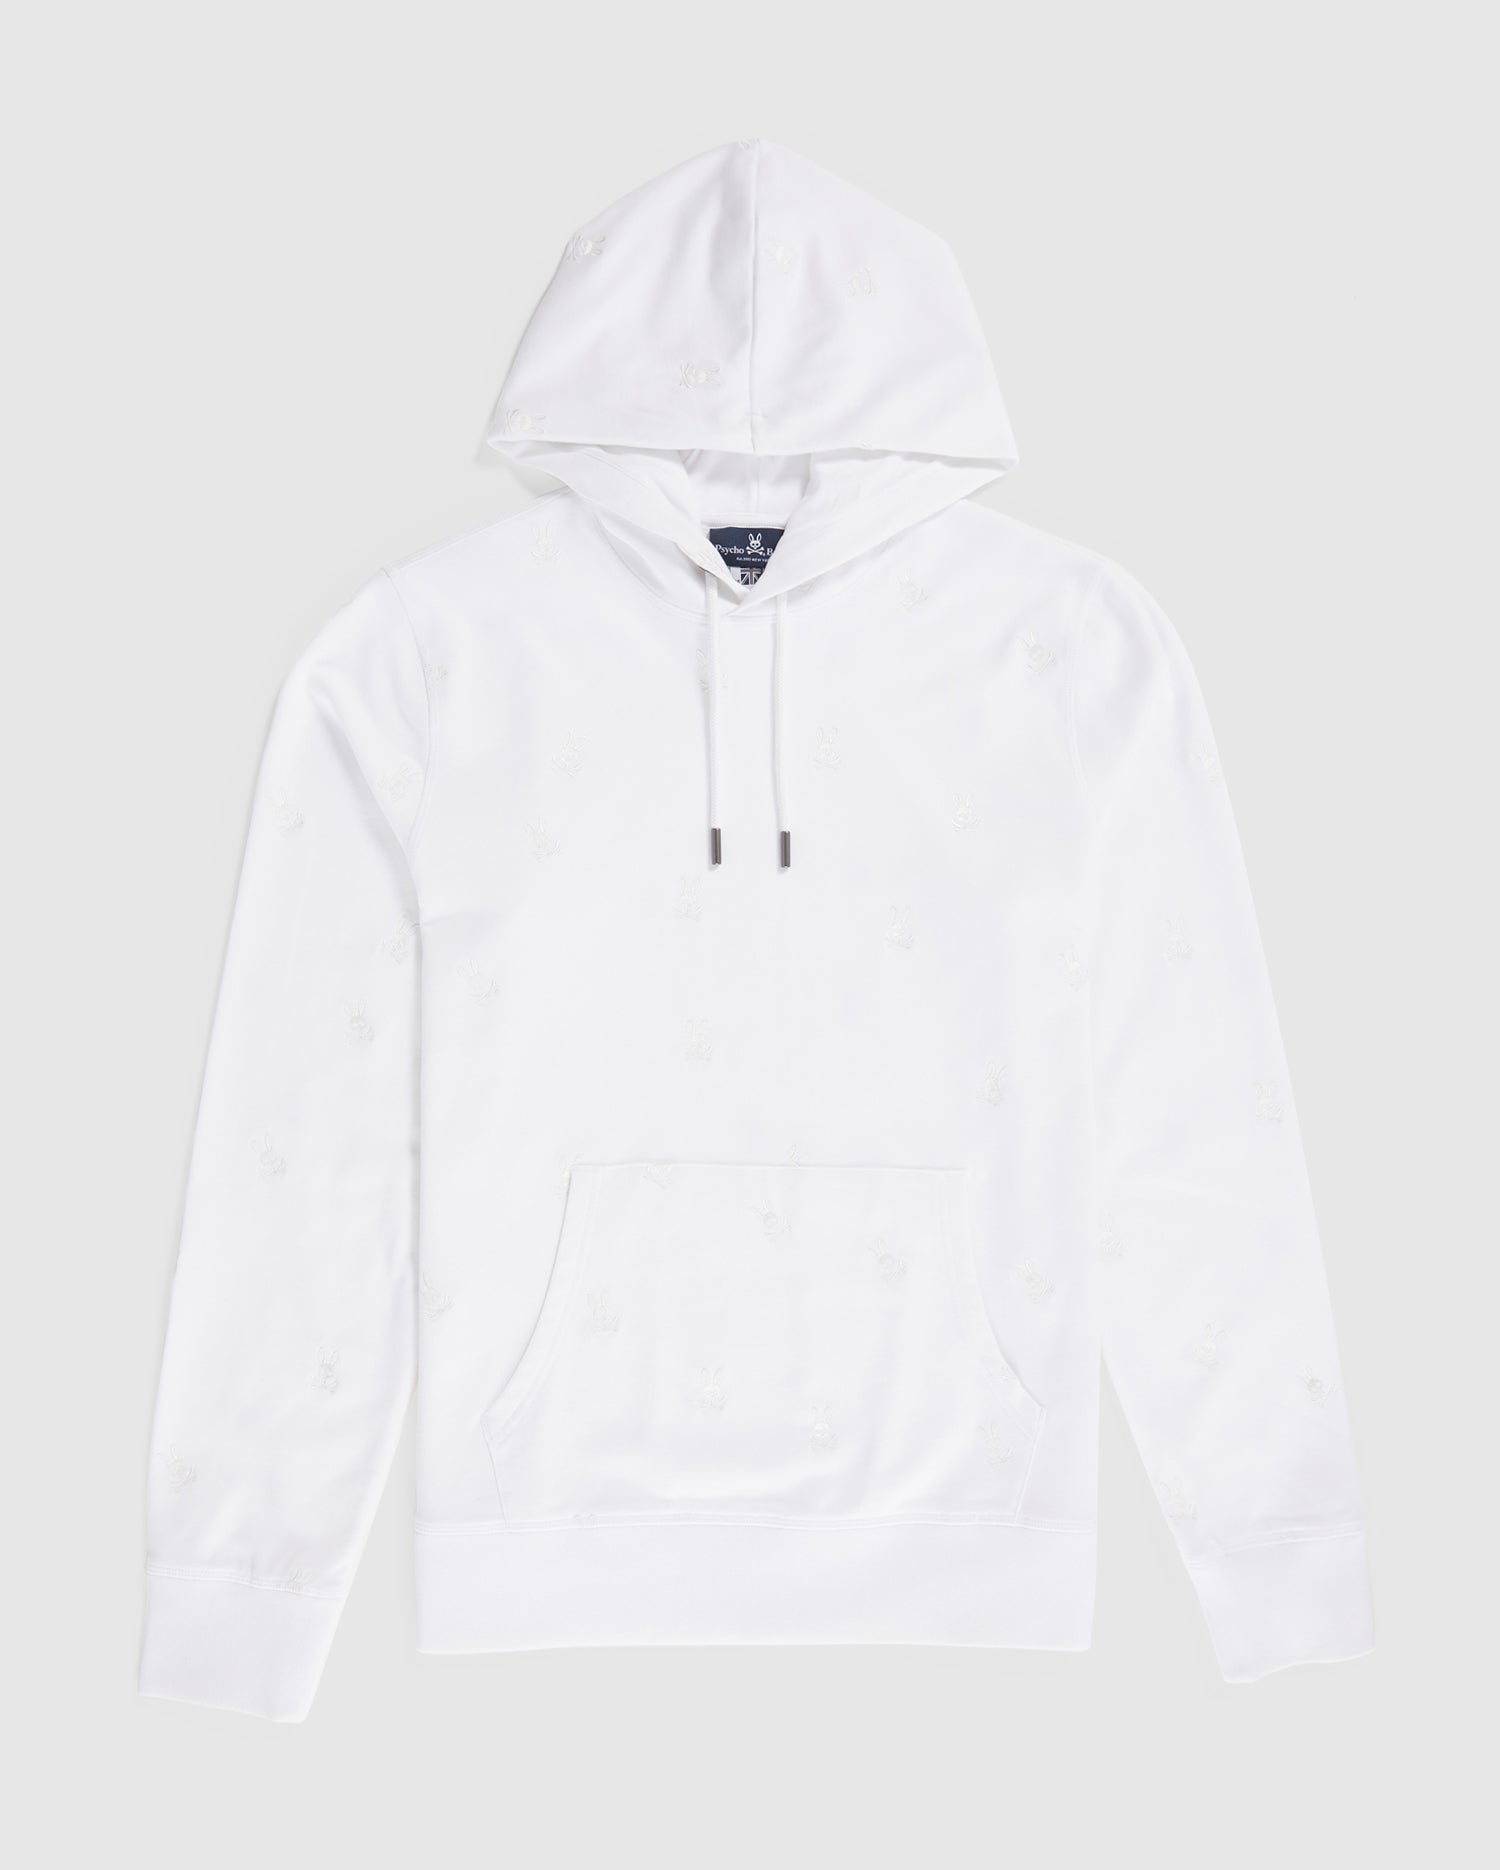 WHITE PSYCHO | MENS WOAD POPOVER HOODIE EMBROIDERED BUNNY